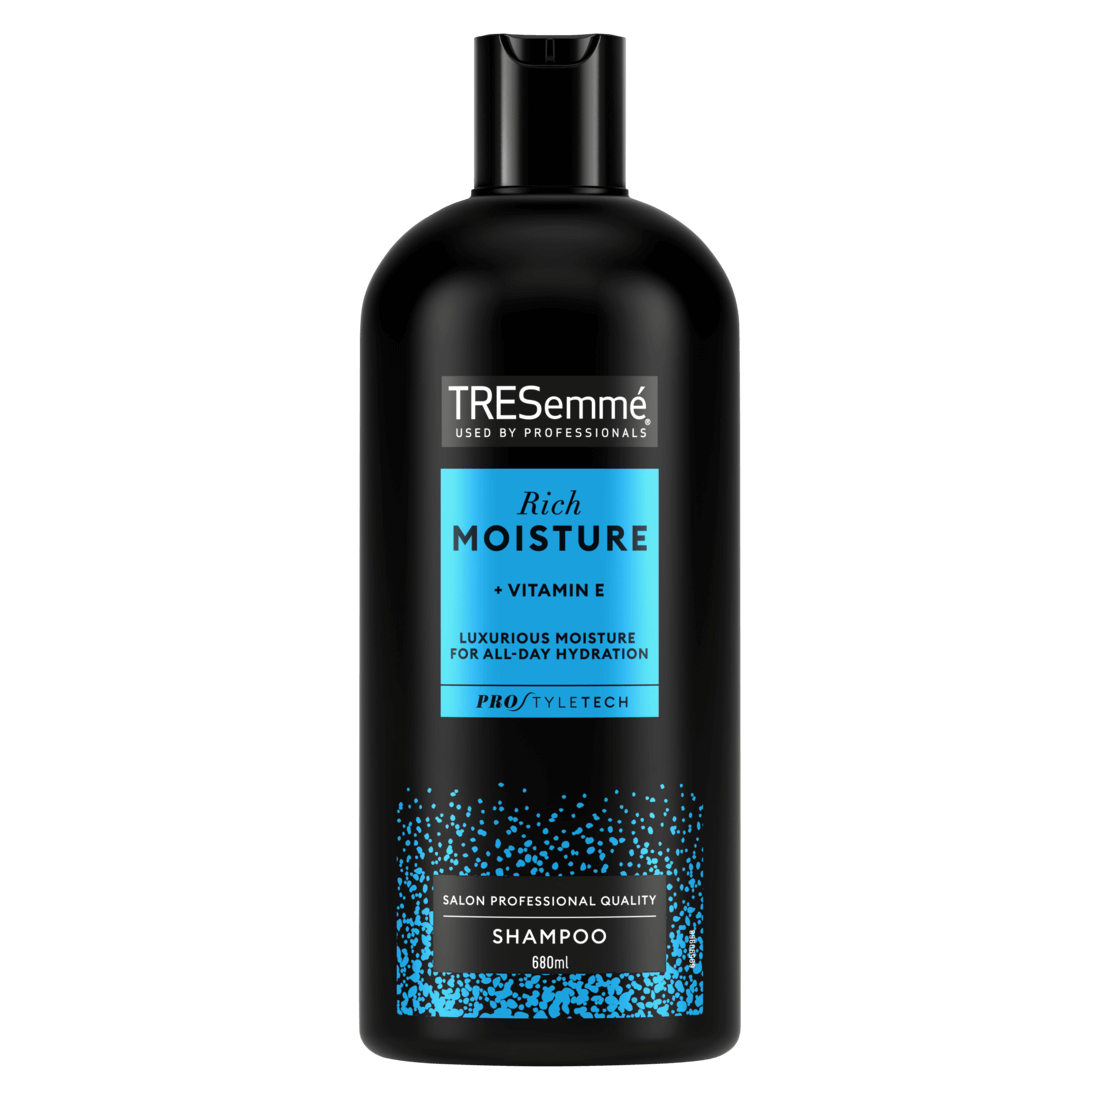 TRESemme  Rich Moisture luxurious moisture for all-day hydration Shampoo for dry, damaged hair 6x 680 ml